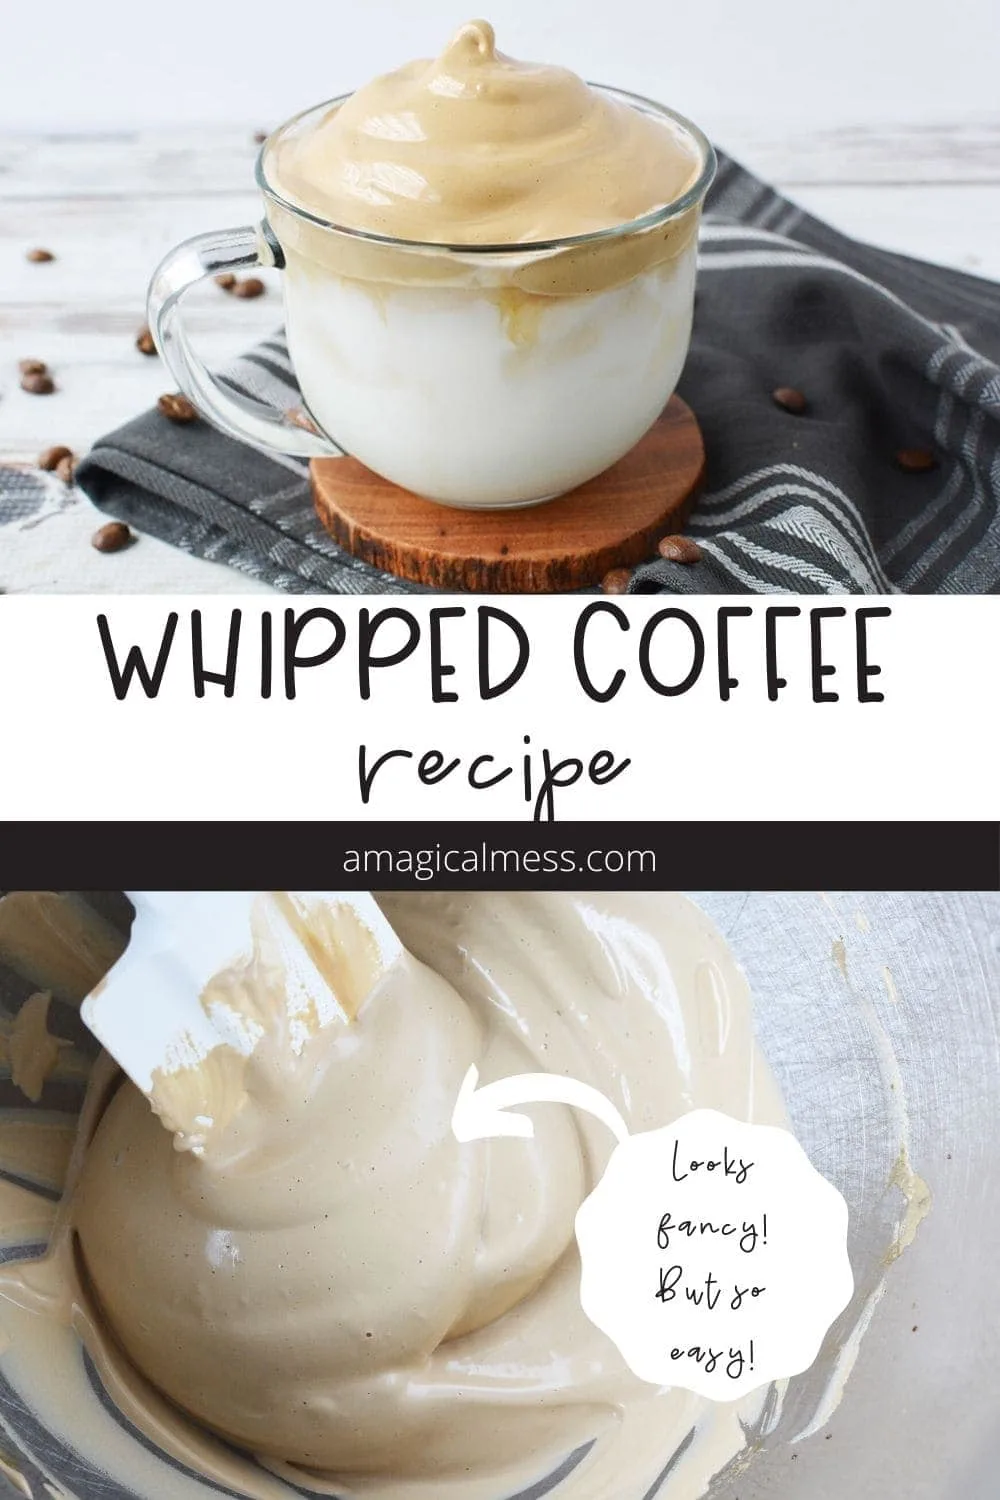 Whipped coffee in a mug and in a mixing bowl